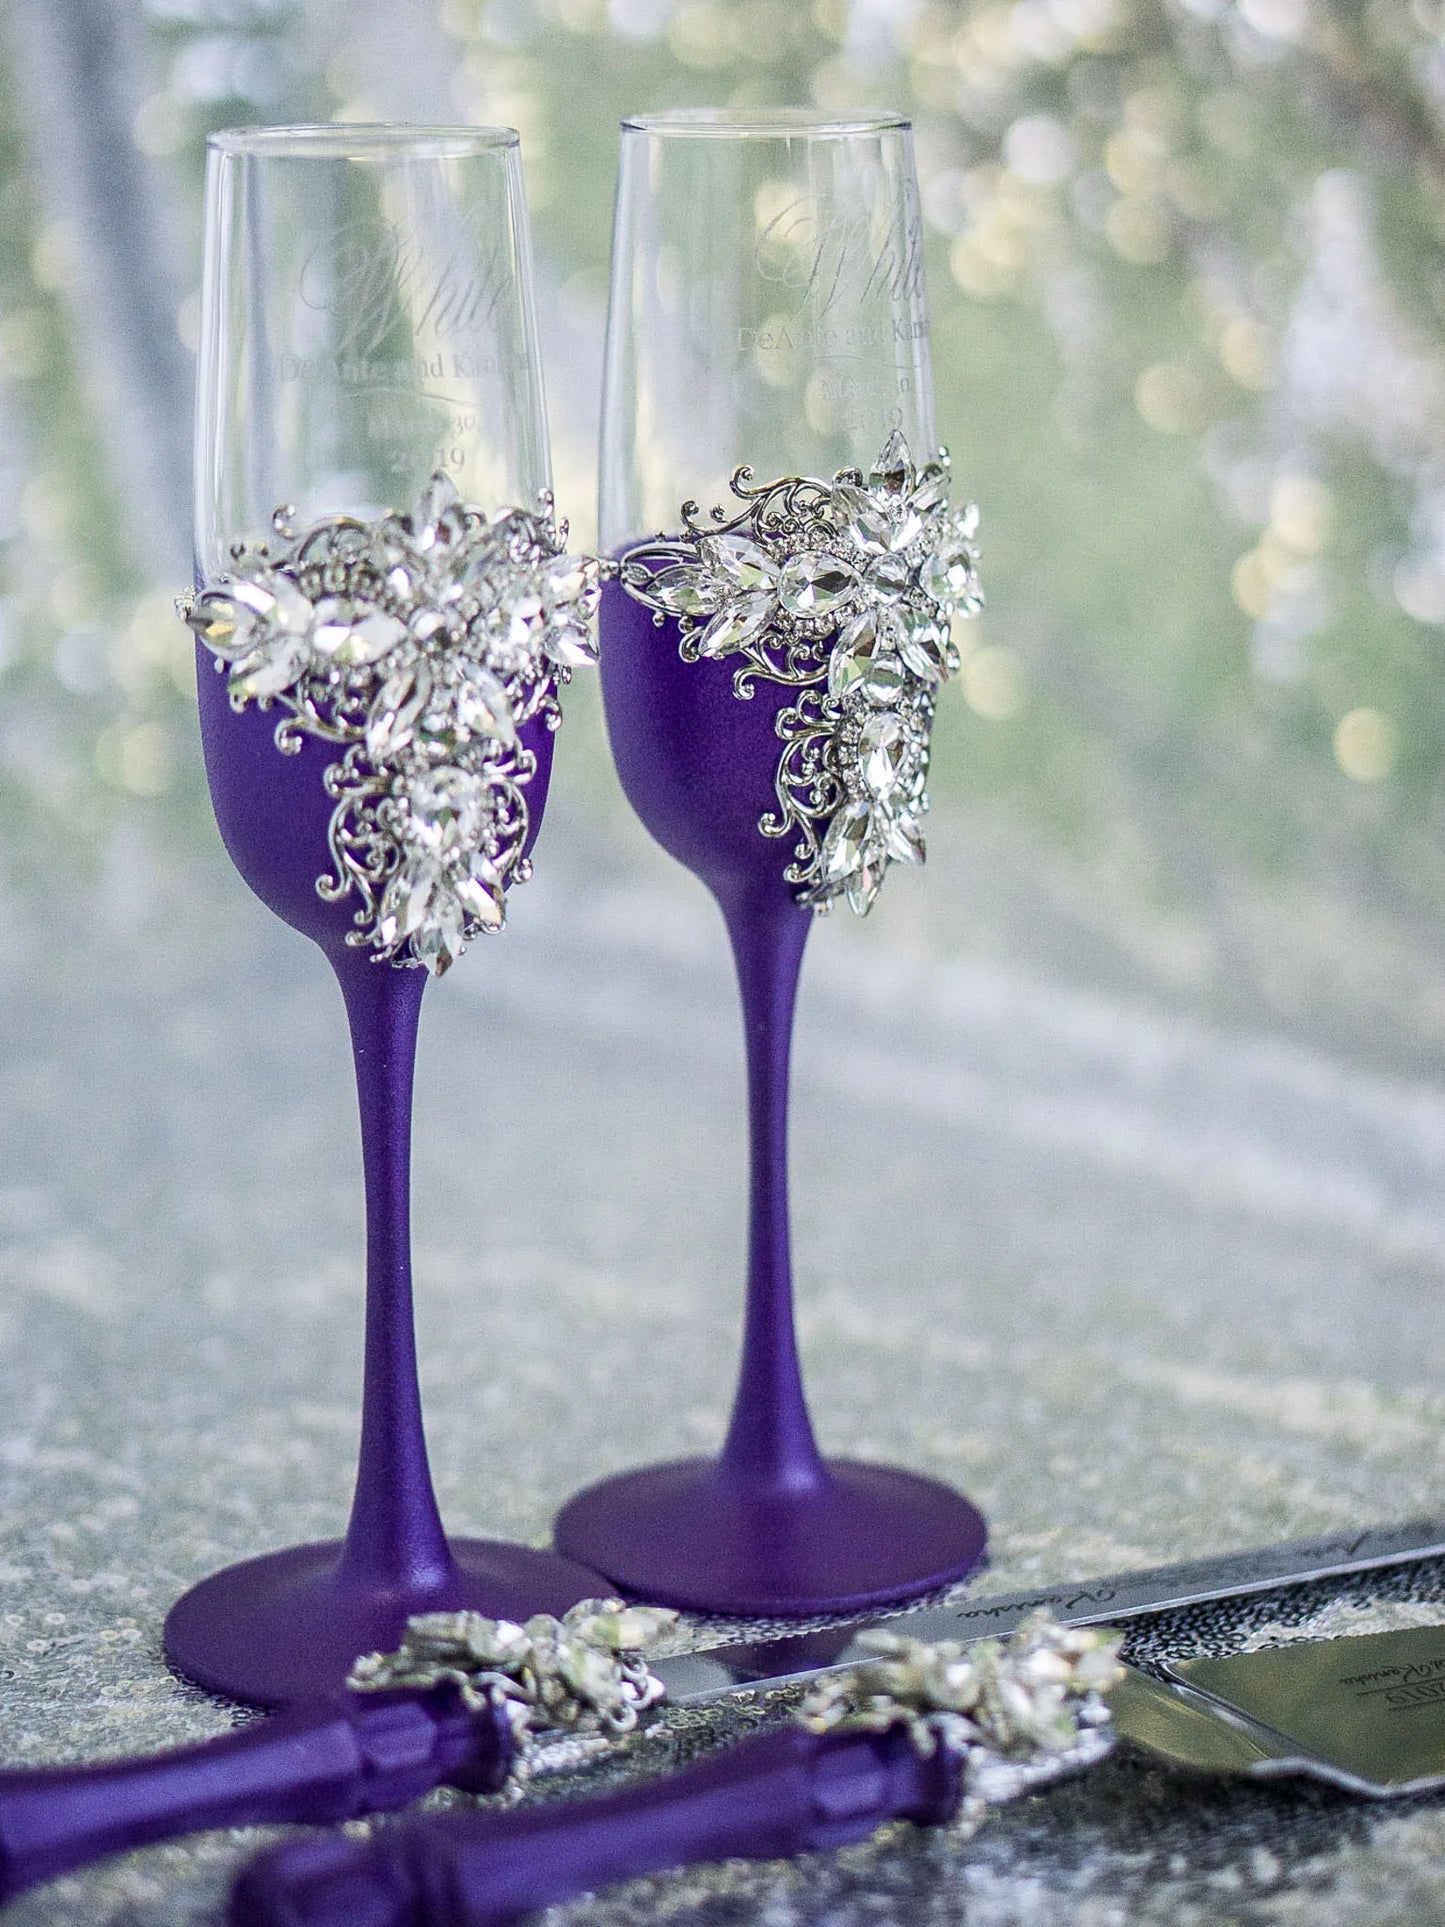 Silver and Plum Purple Personalized Crystals Decorative Champagne Glasses with Cake Serving Accessories